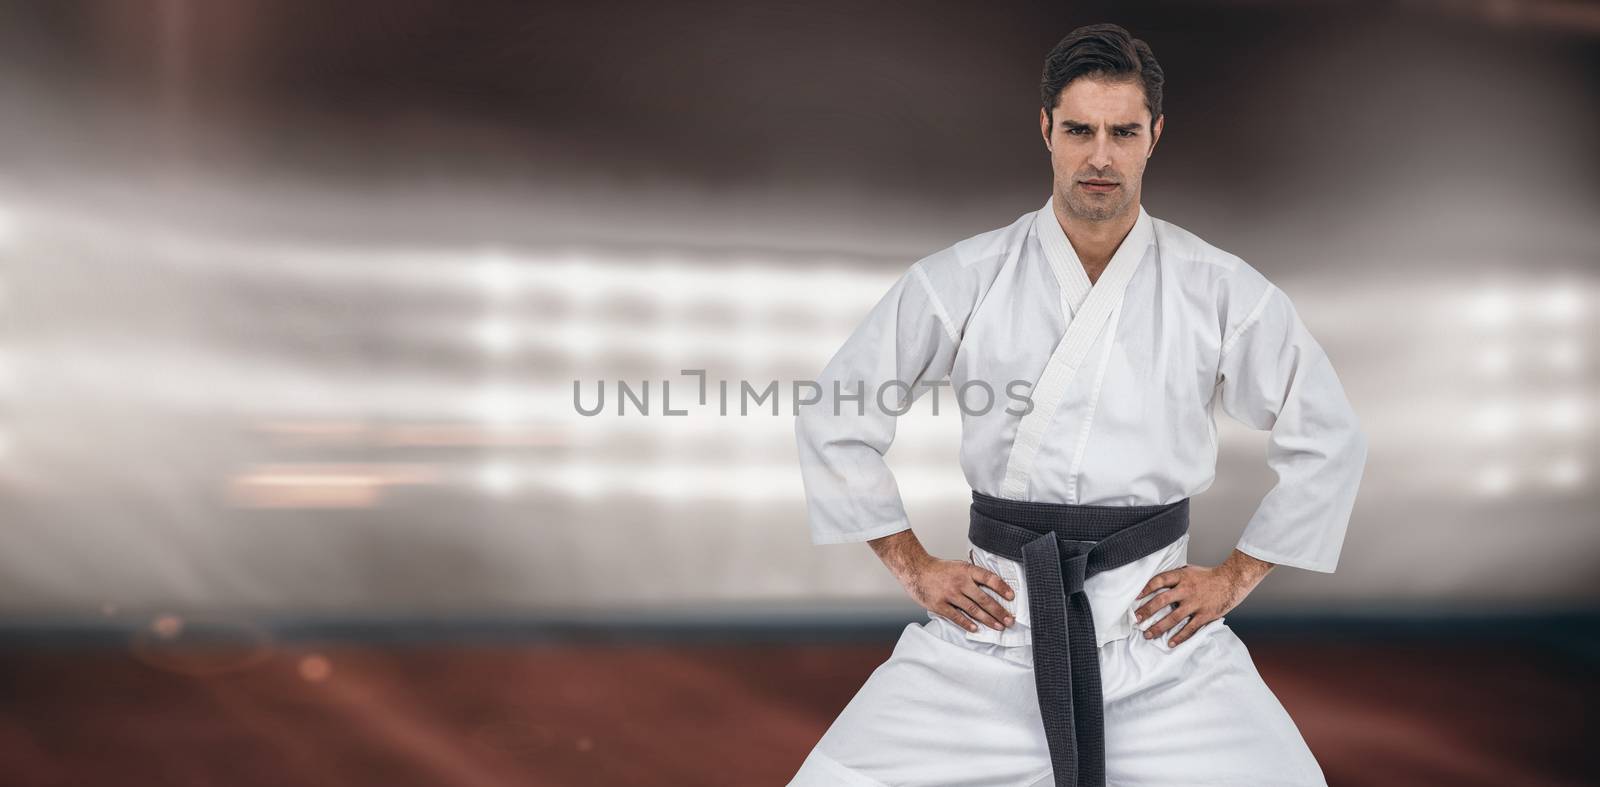 Portrait of fighter posing on white background against composite image of playing field indoor